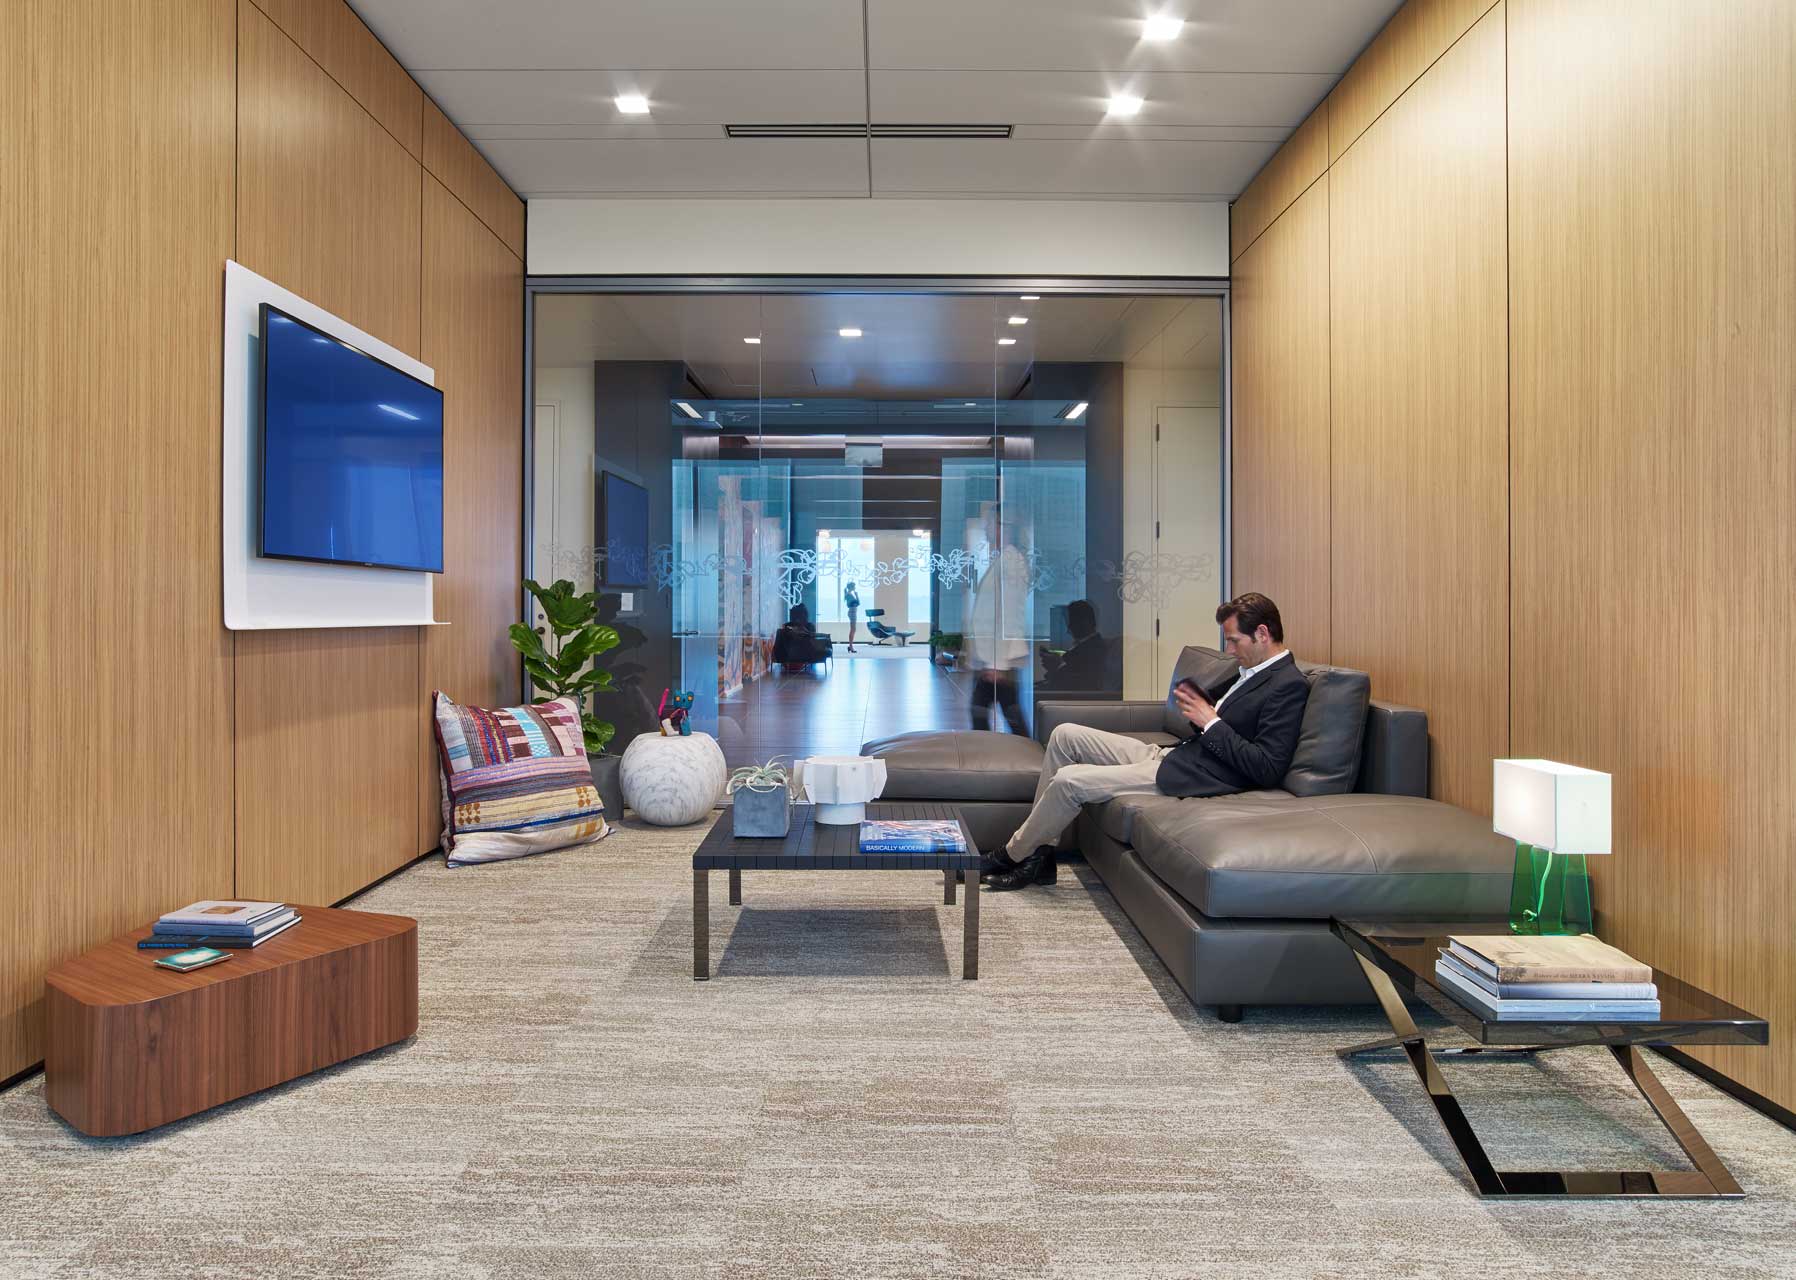 The relaxed, seated posture of the furniture in this retreat create an opportunity to recharge or fosters collaboration in a lounge setting leveraging technology. The leather sofa and the wood walls help create warmth in an open office environment.